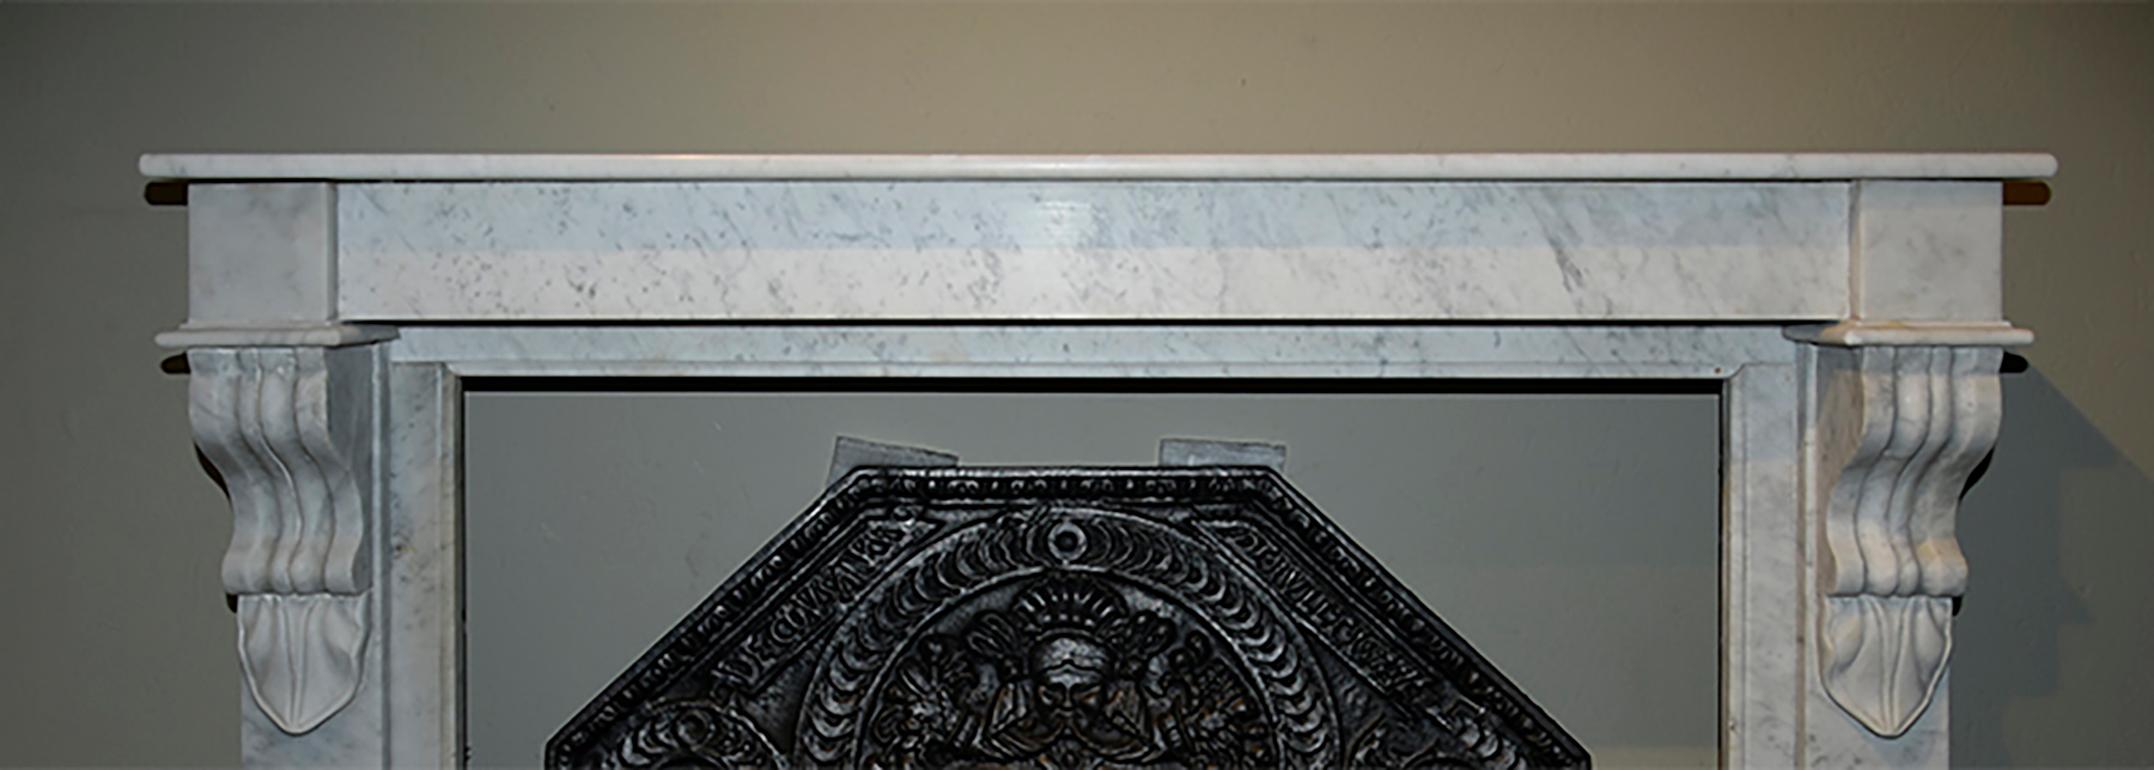 firplace mantels